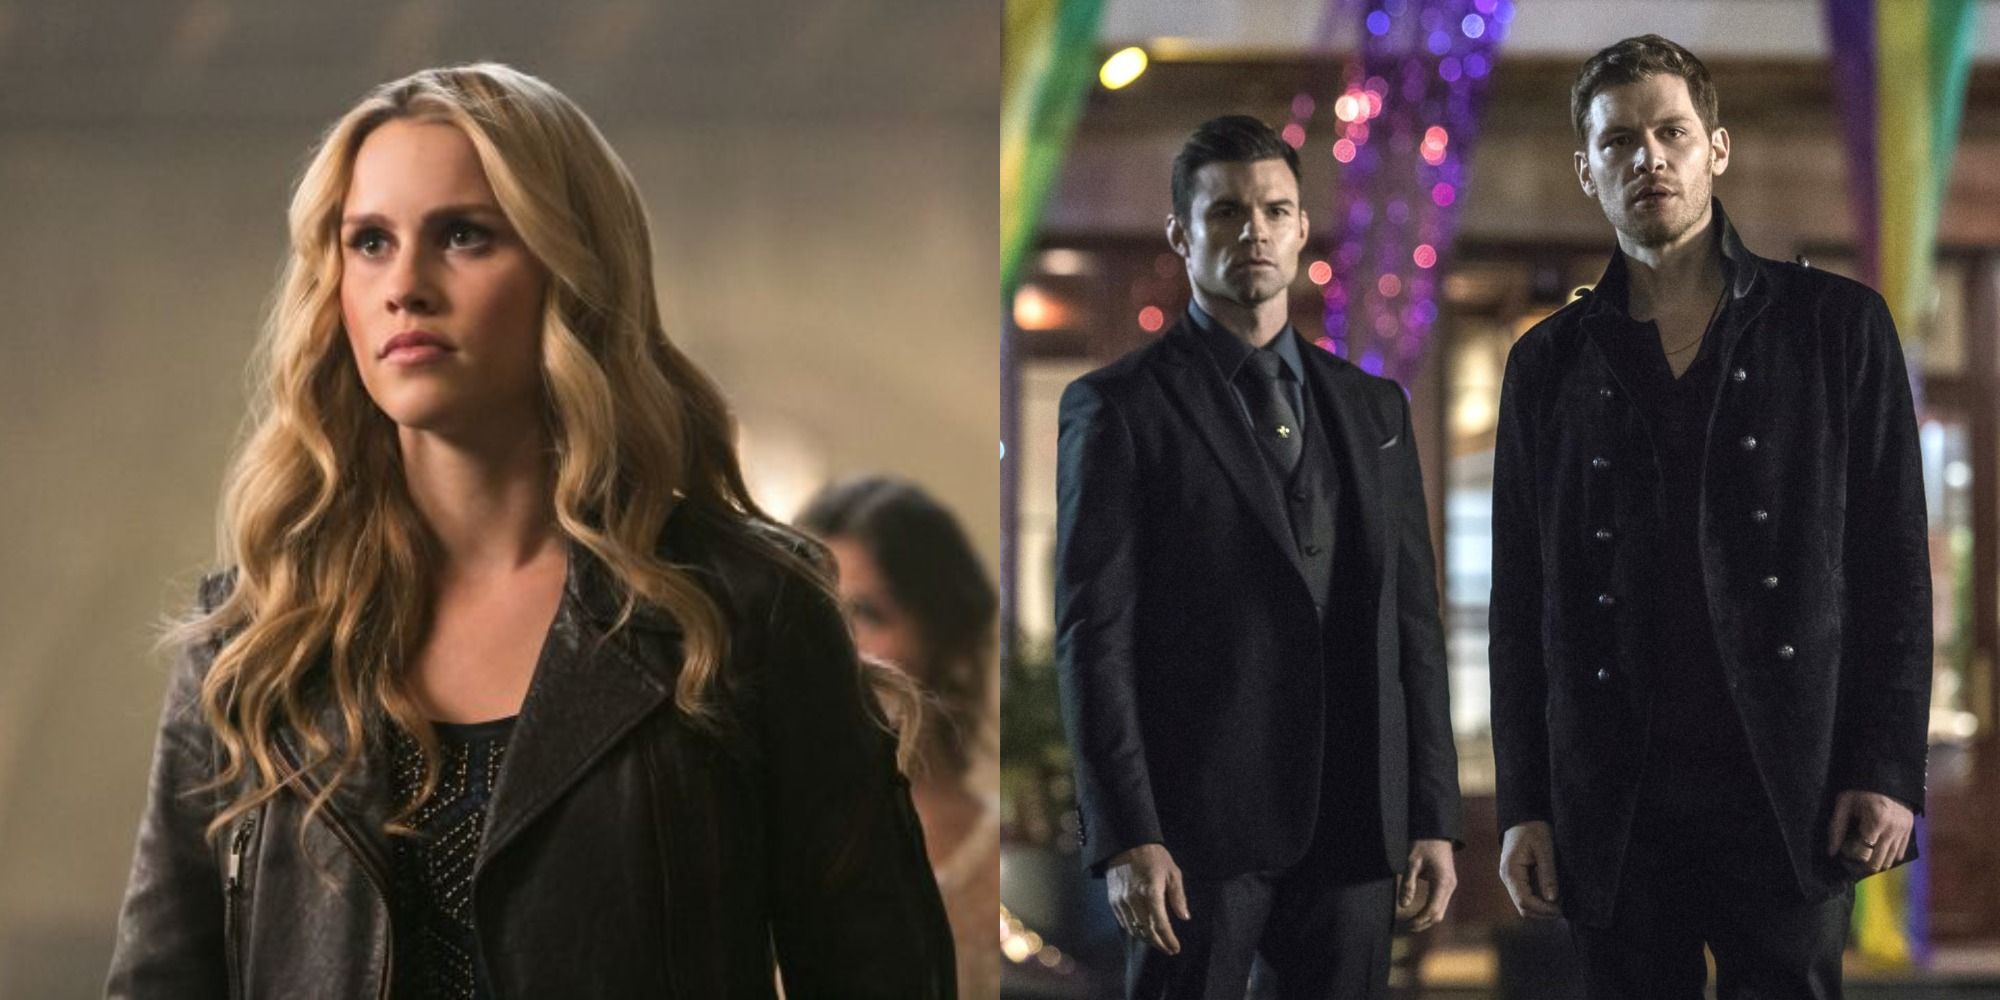 The Originals One Quote From Each Character That Perfectly Sums Up Their Personality